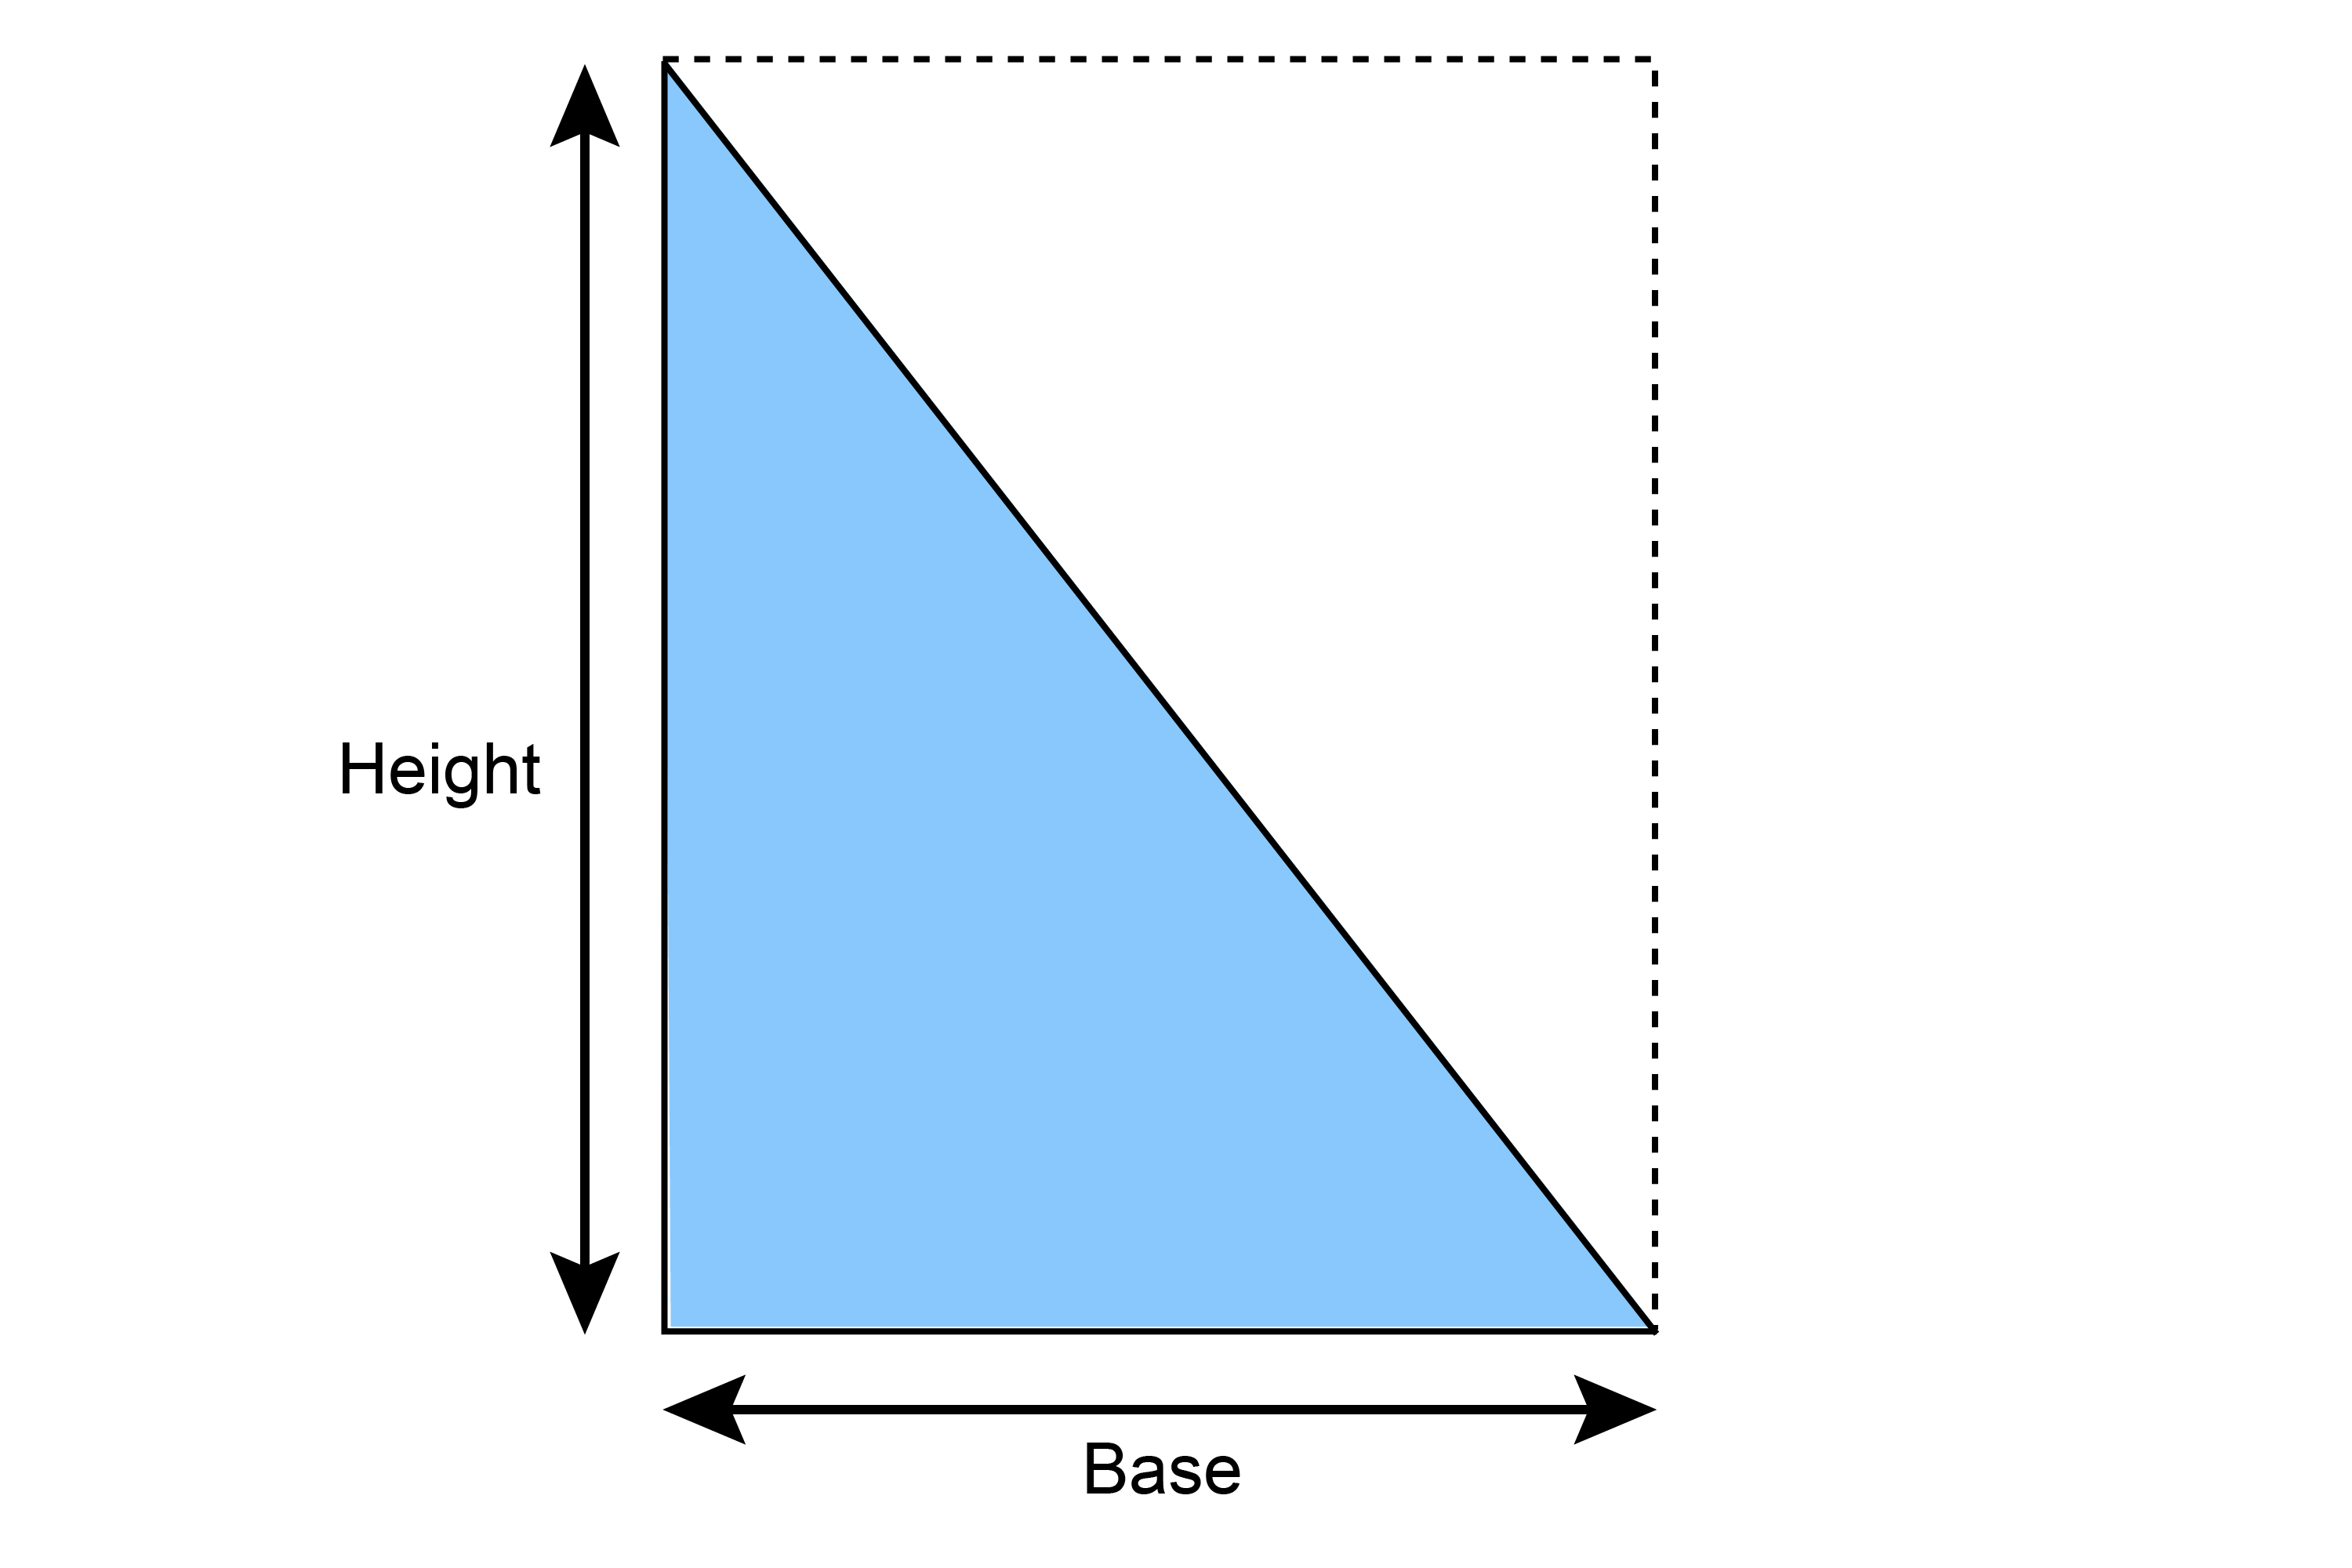 To find the area of a triangle its half base times height